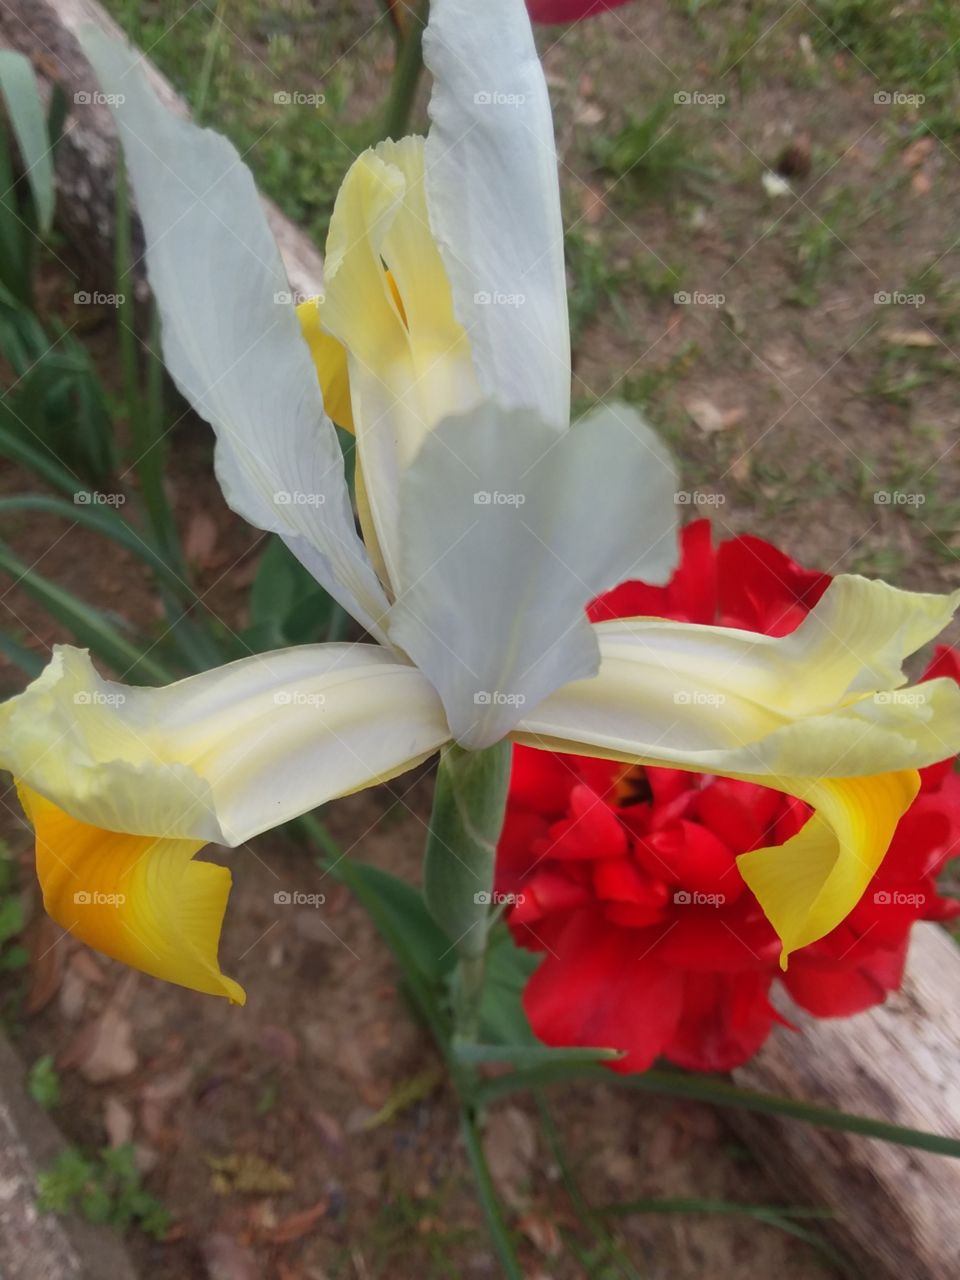 Up close look at a Such Iris 'Apollo' and a Peony flowered Tulip in the background.